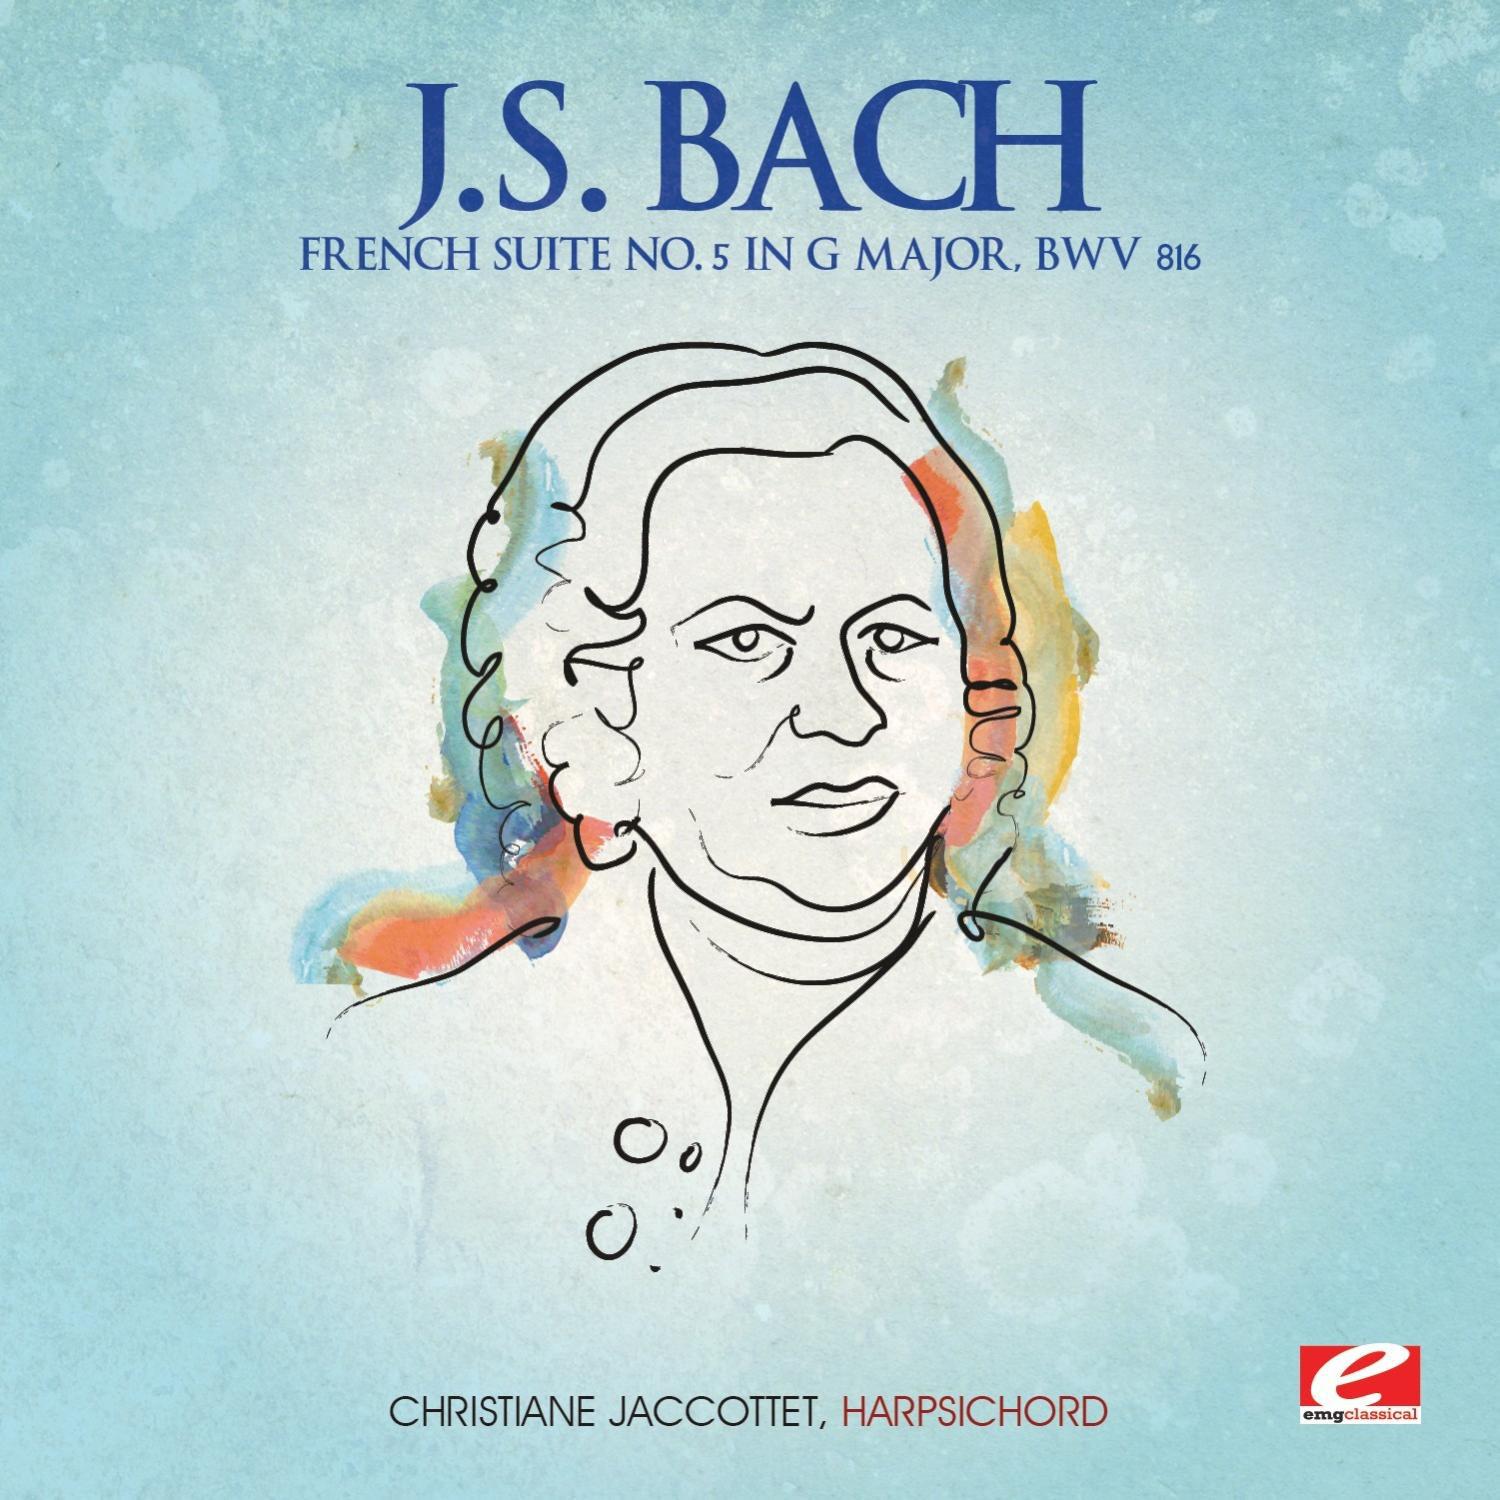 J.S. Bach: French Suite No. 5 in G Major, BWV 816 (Digitally Remastered)